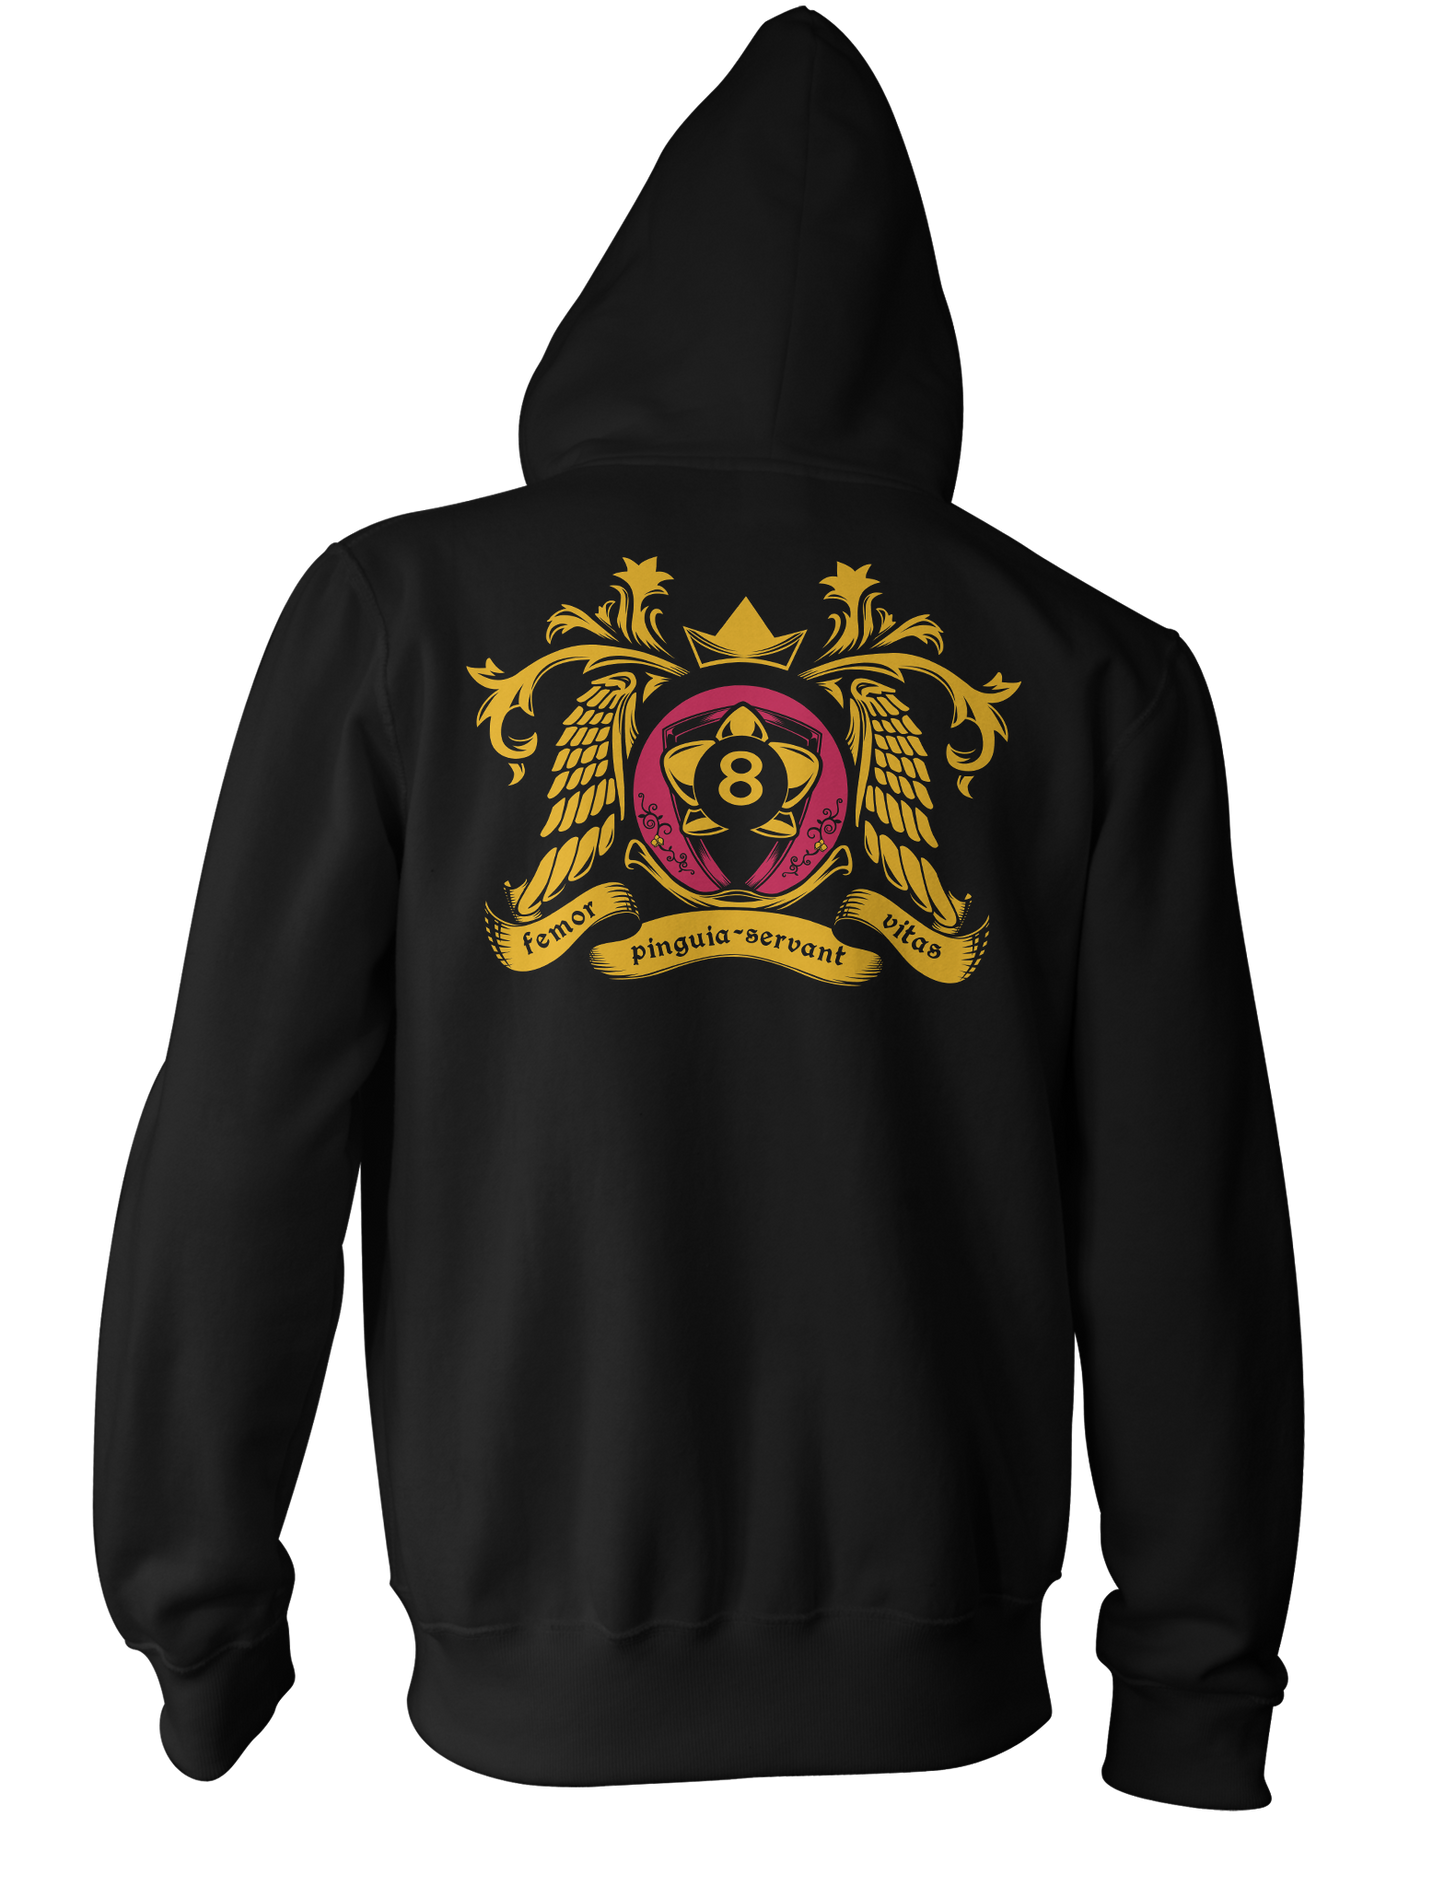 The Crest Hoodie